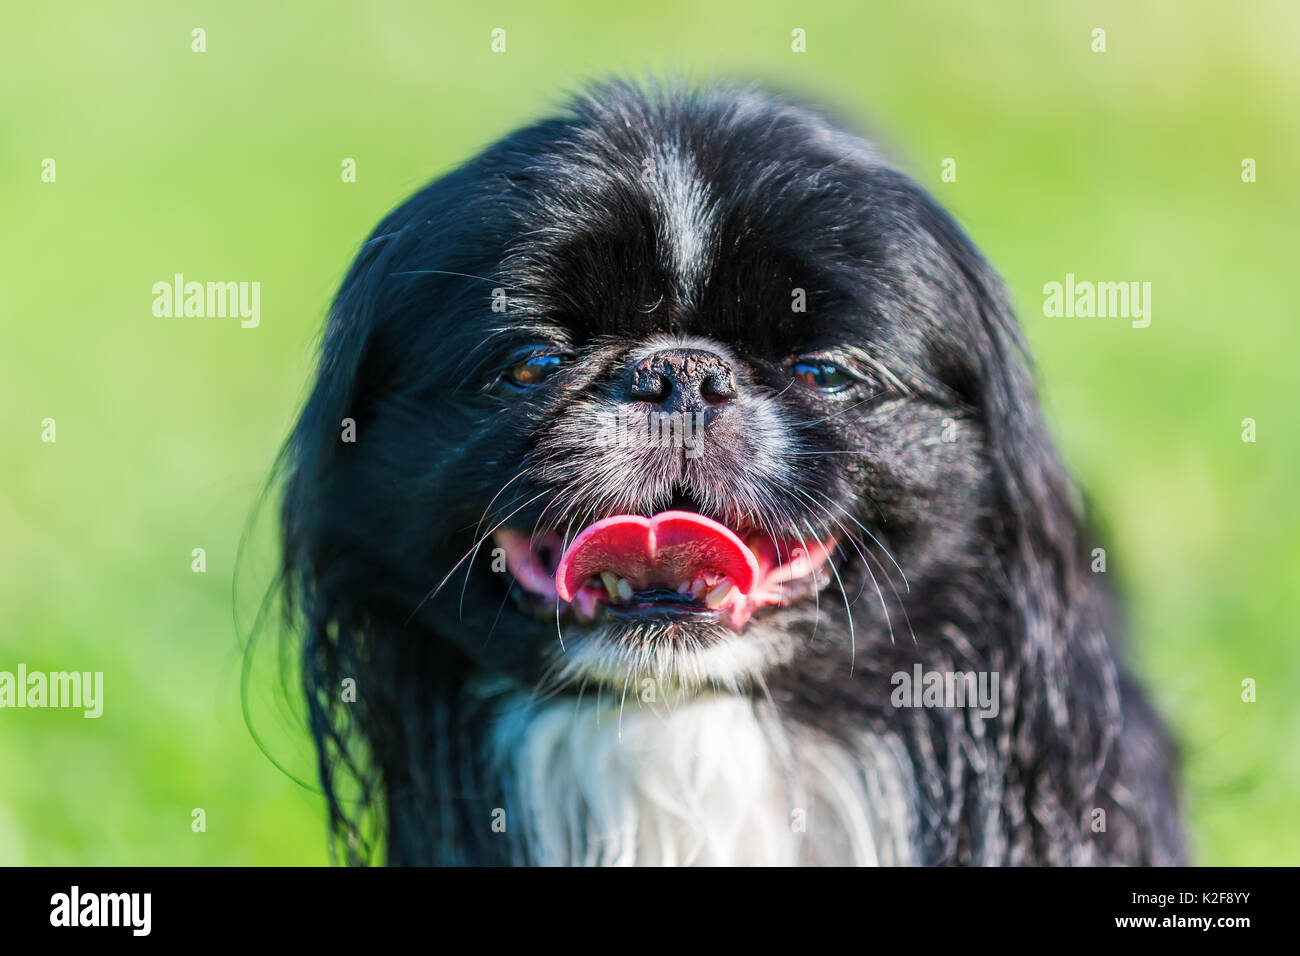 portrait picture of a cute pekinese dog Stock Photo